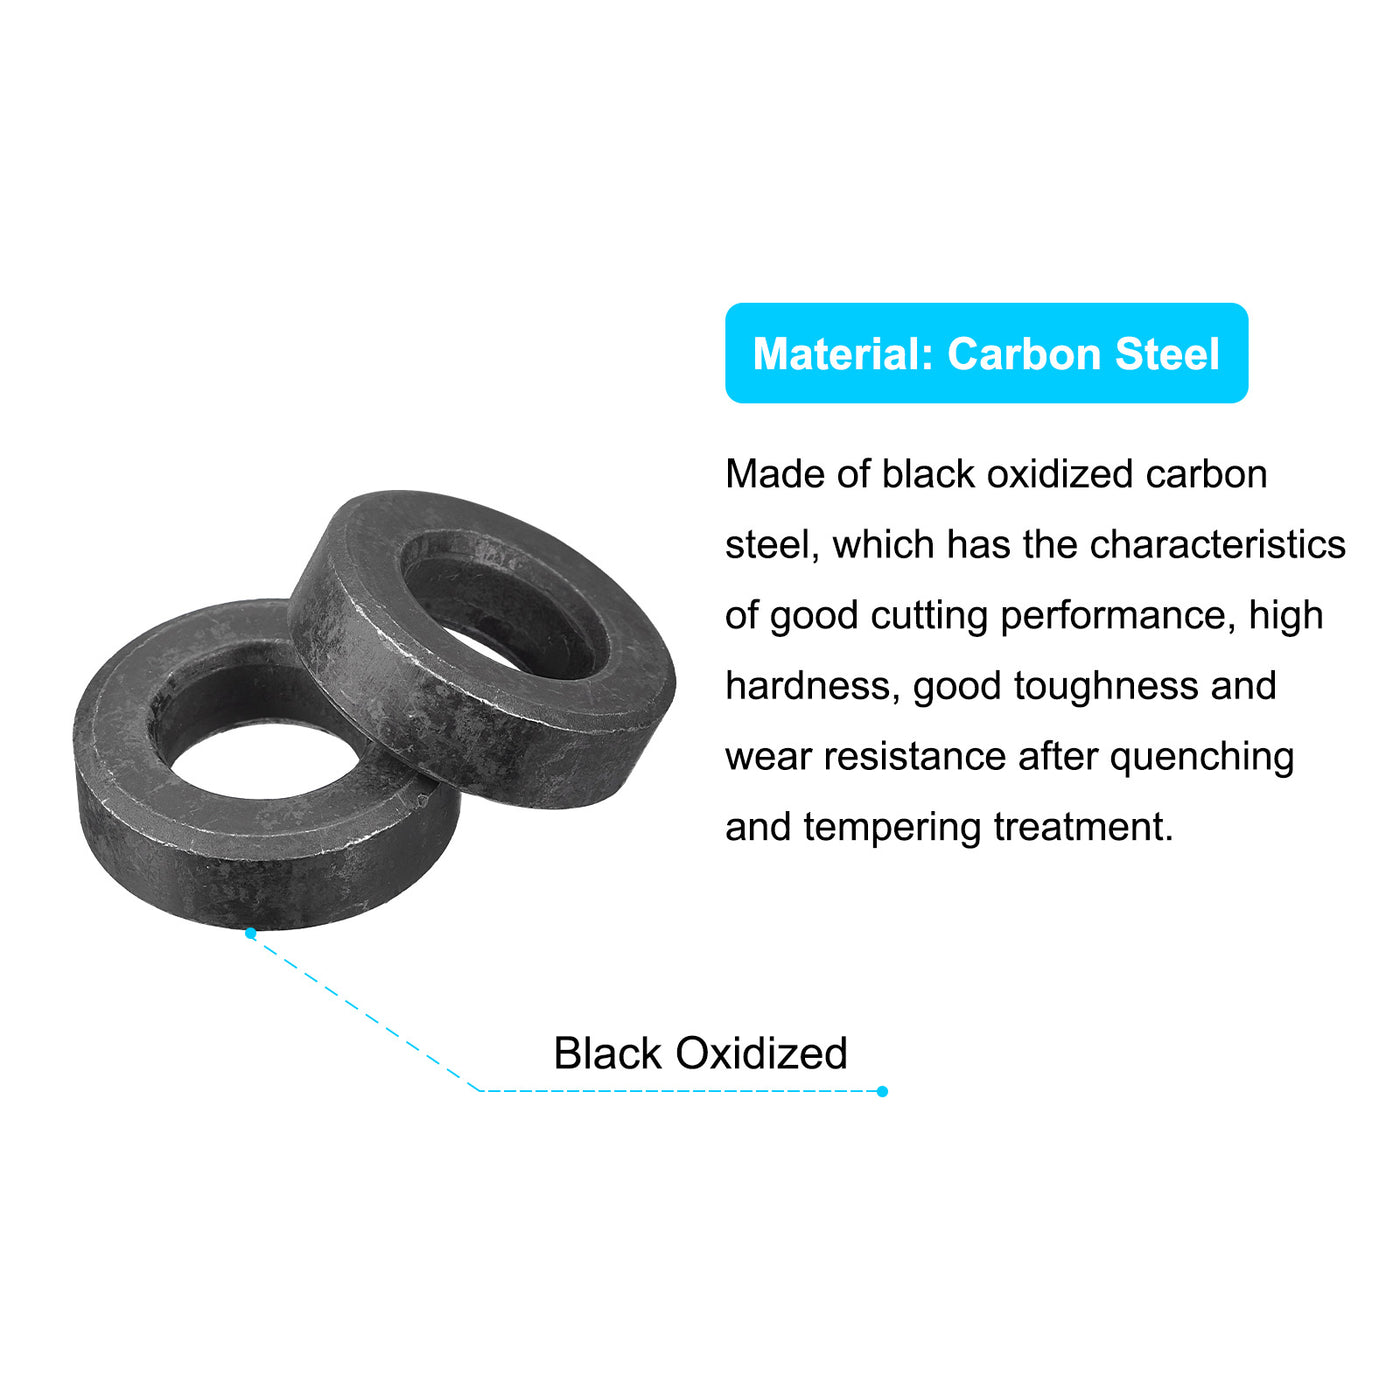 uxcell Uxcell M16 Carbon Steel Flat Washer 5pcs 17x33x10mm Grade 8.8 Alloy Steel Fasteners